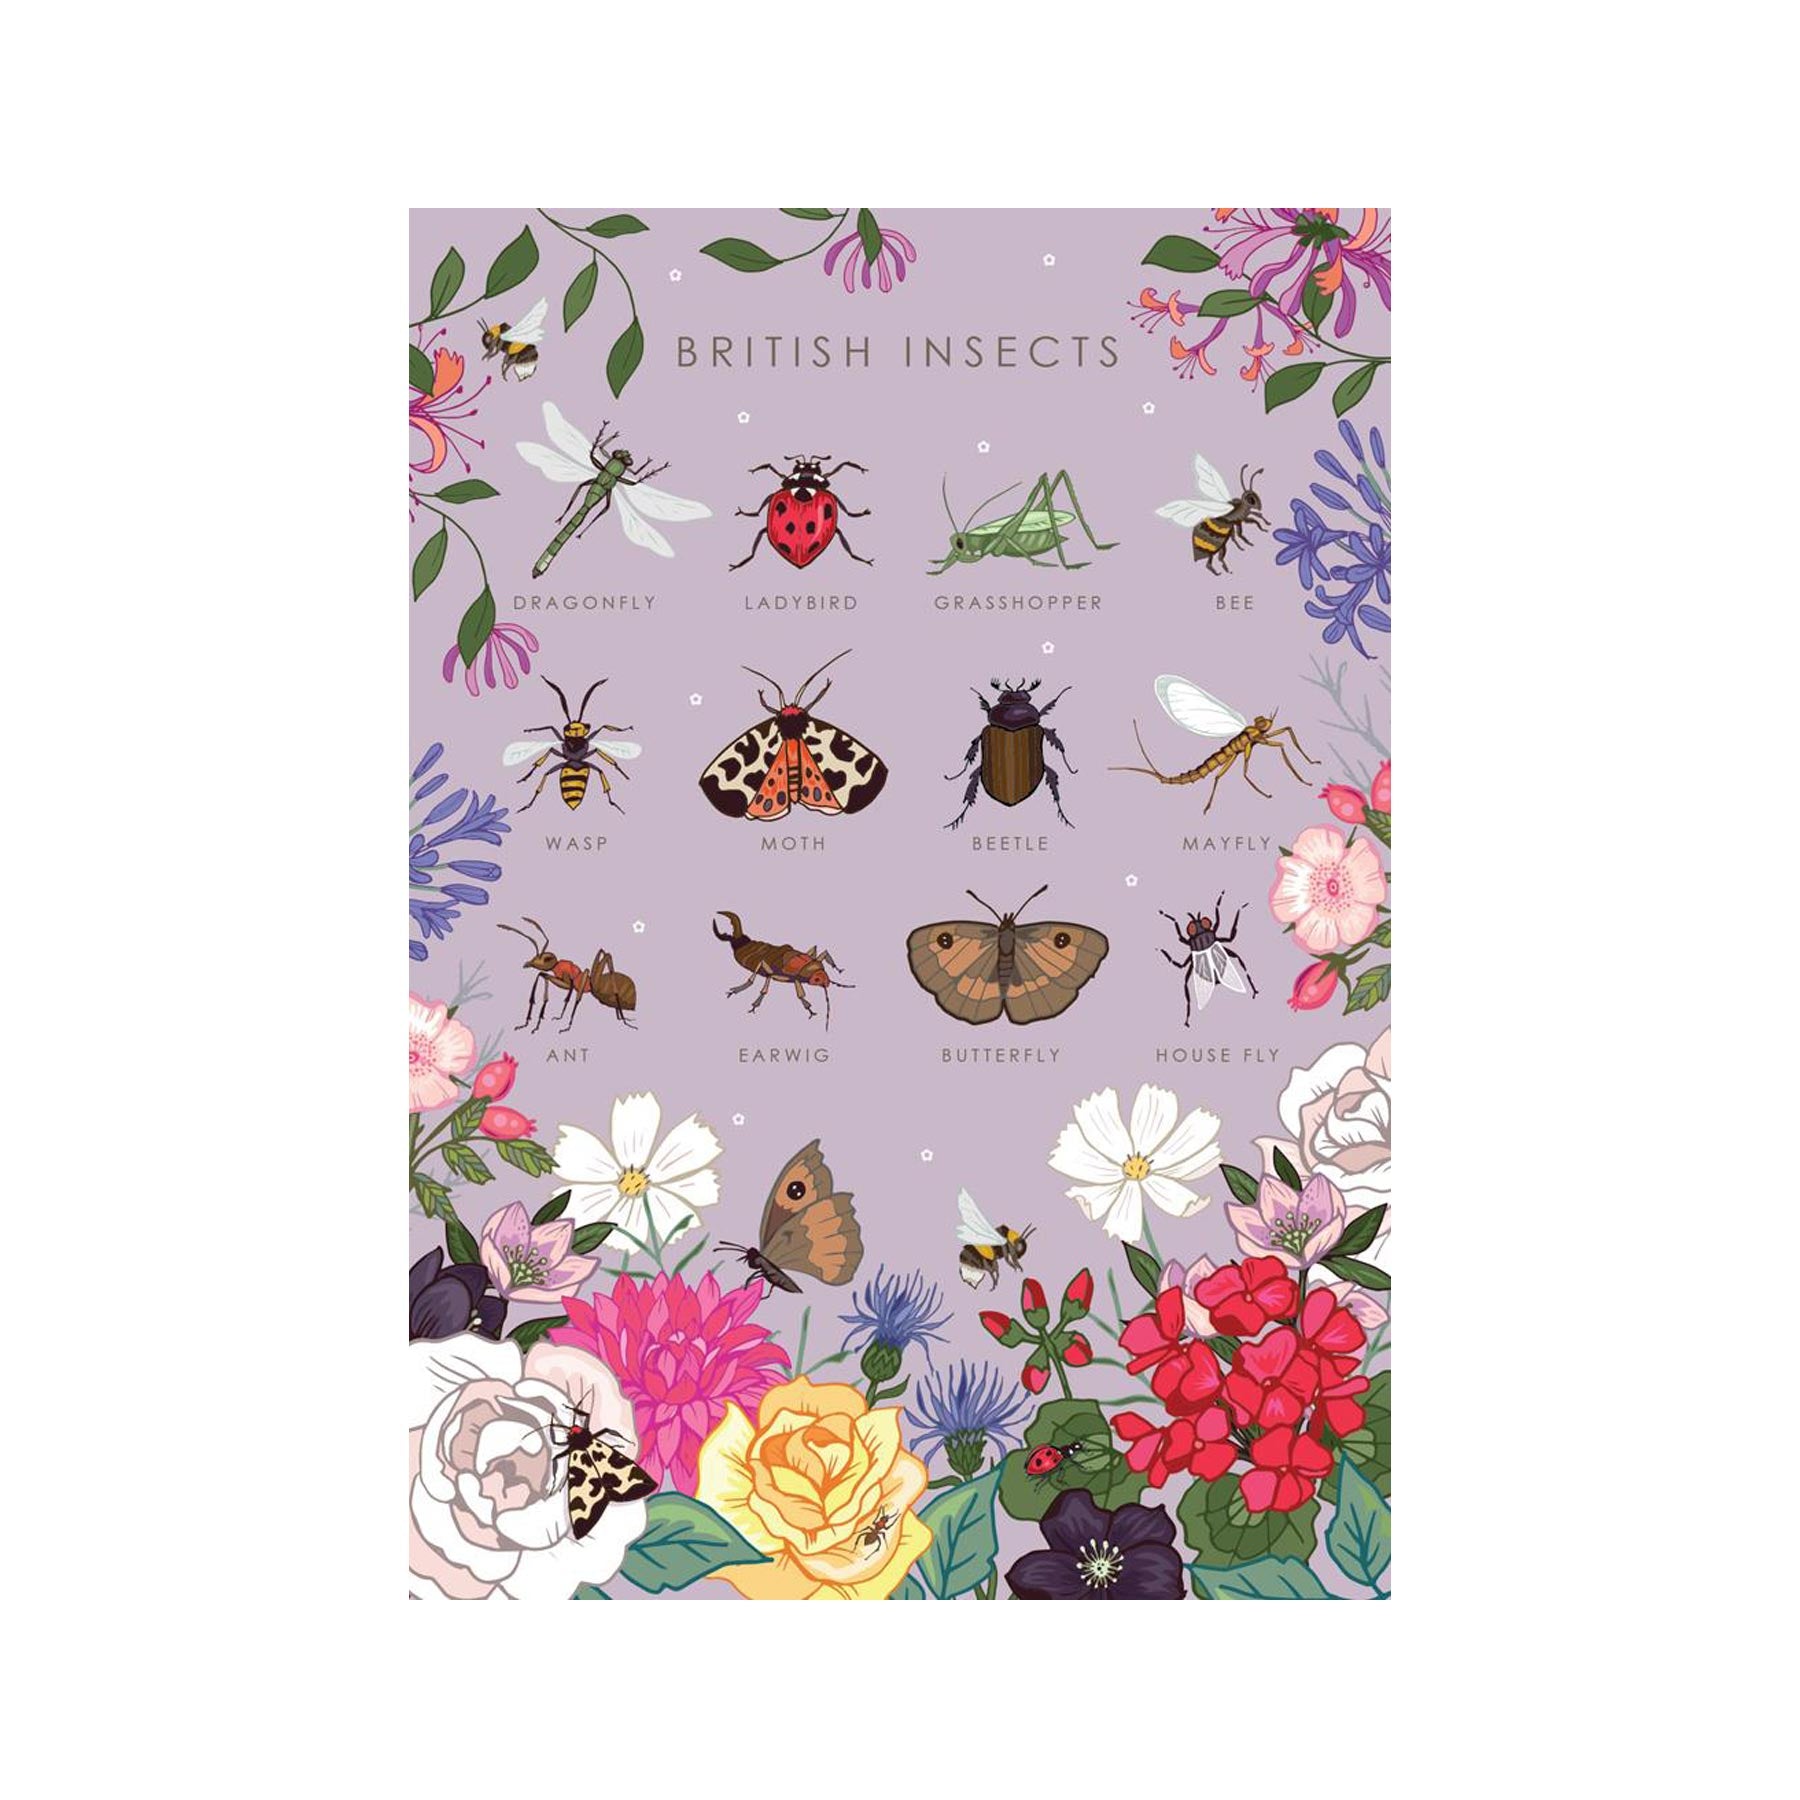 British insects nature guide greeting card